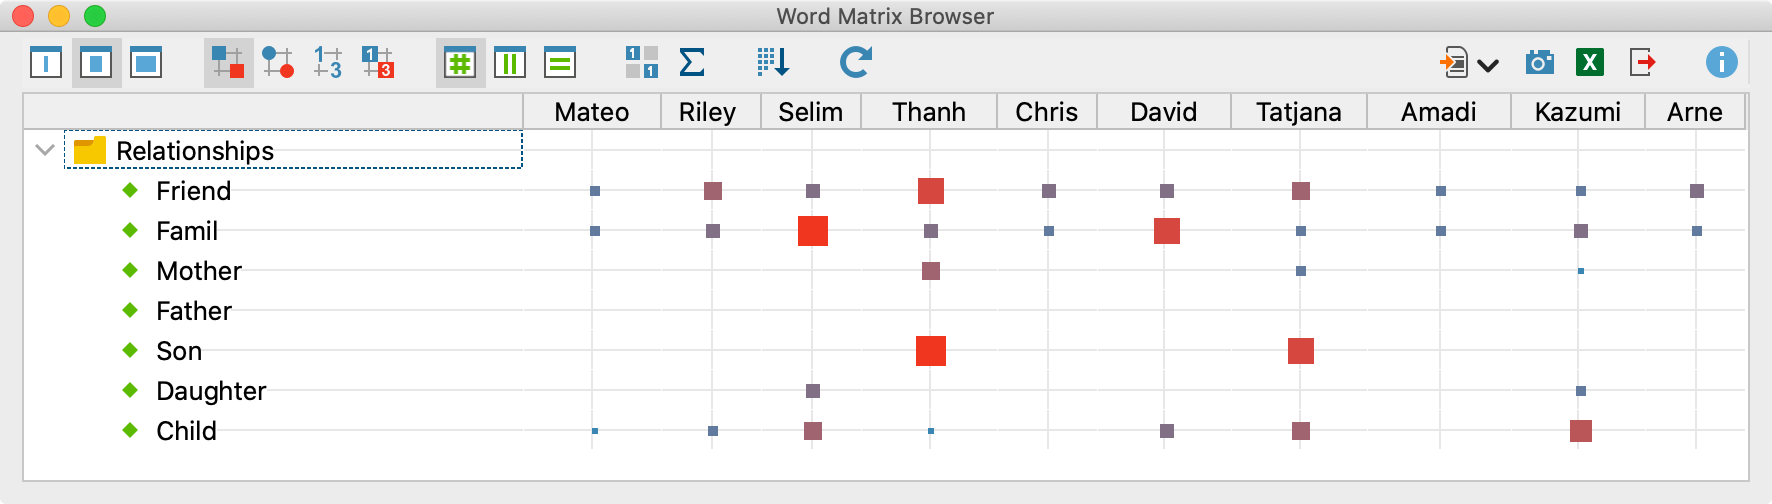 The Word Matrix Browser